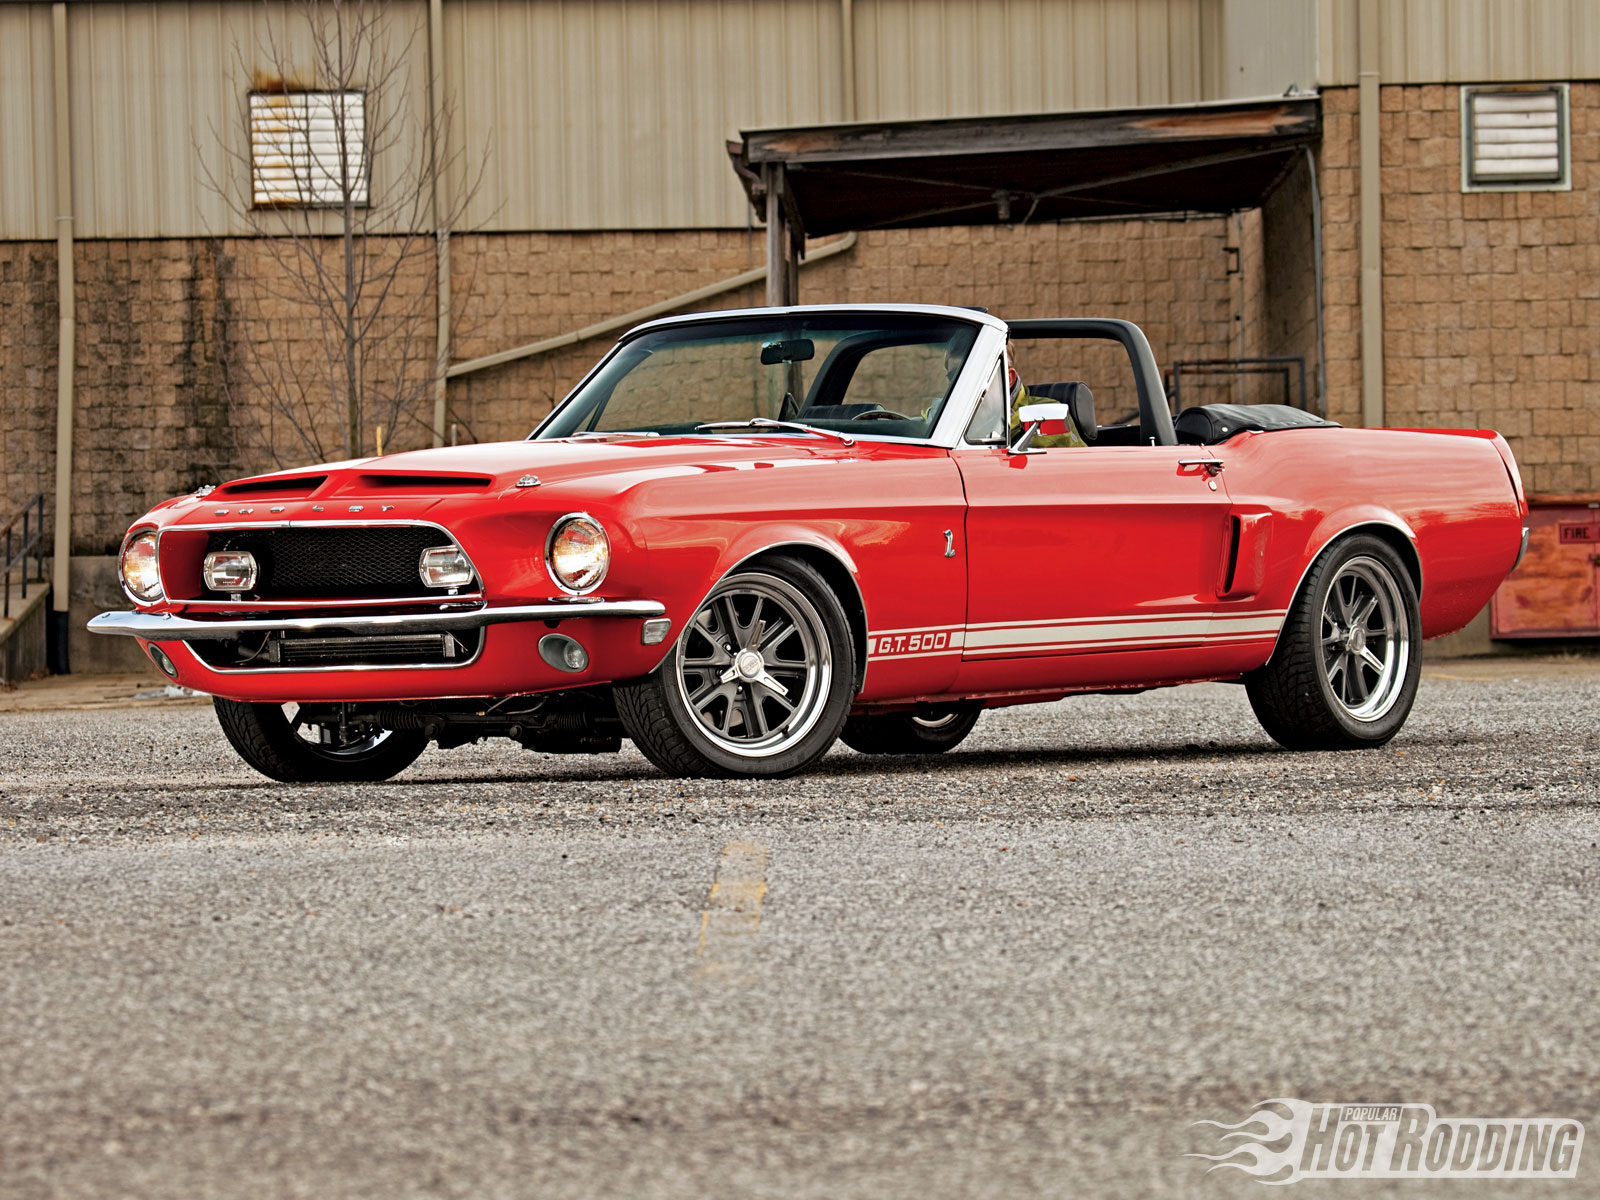 HD wallpaper vehicles, shelby gt500, classic car, convertible, hot rod, muscle car, ford